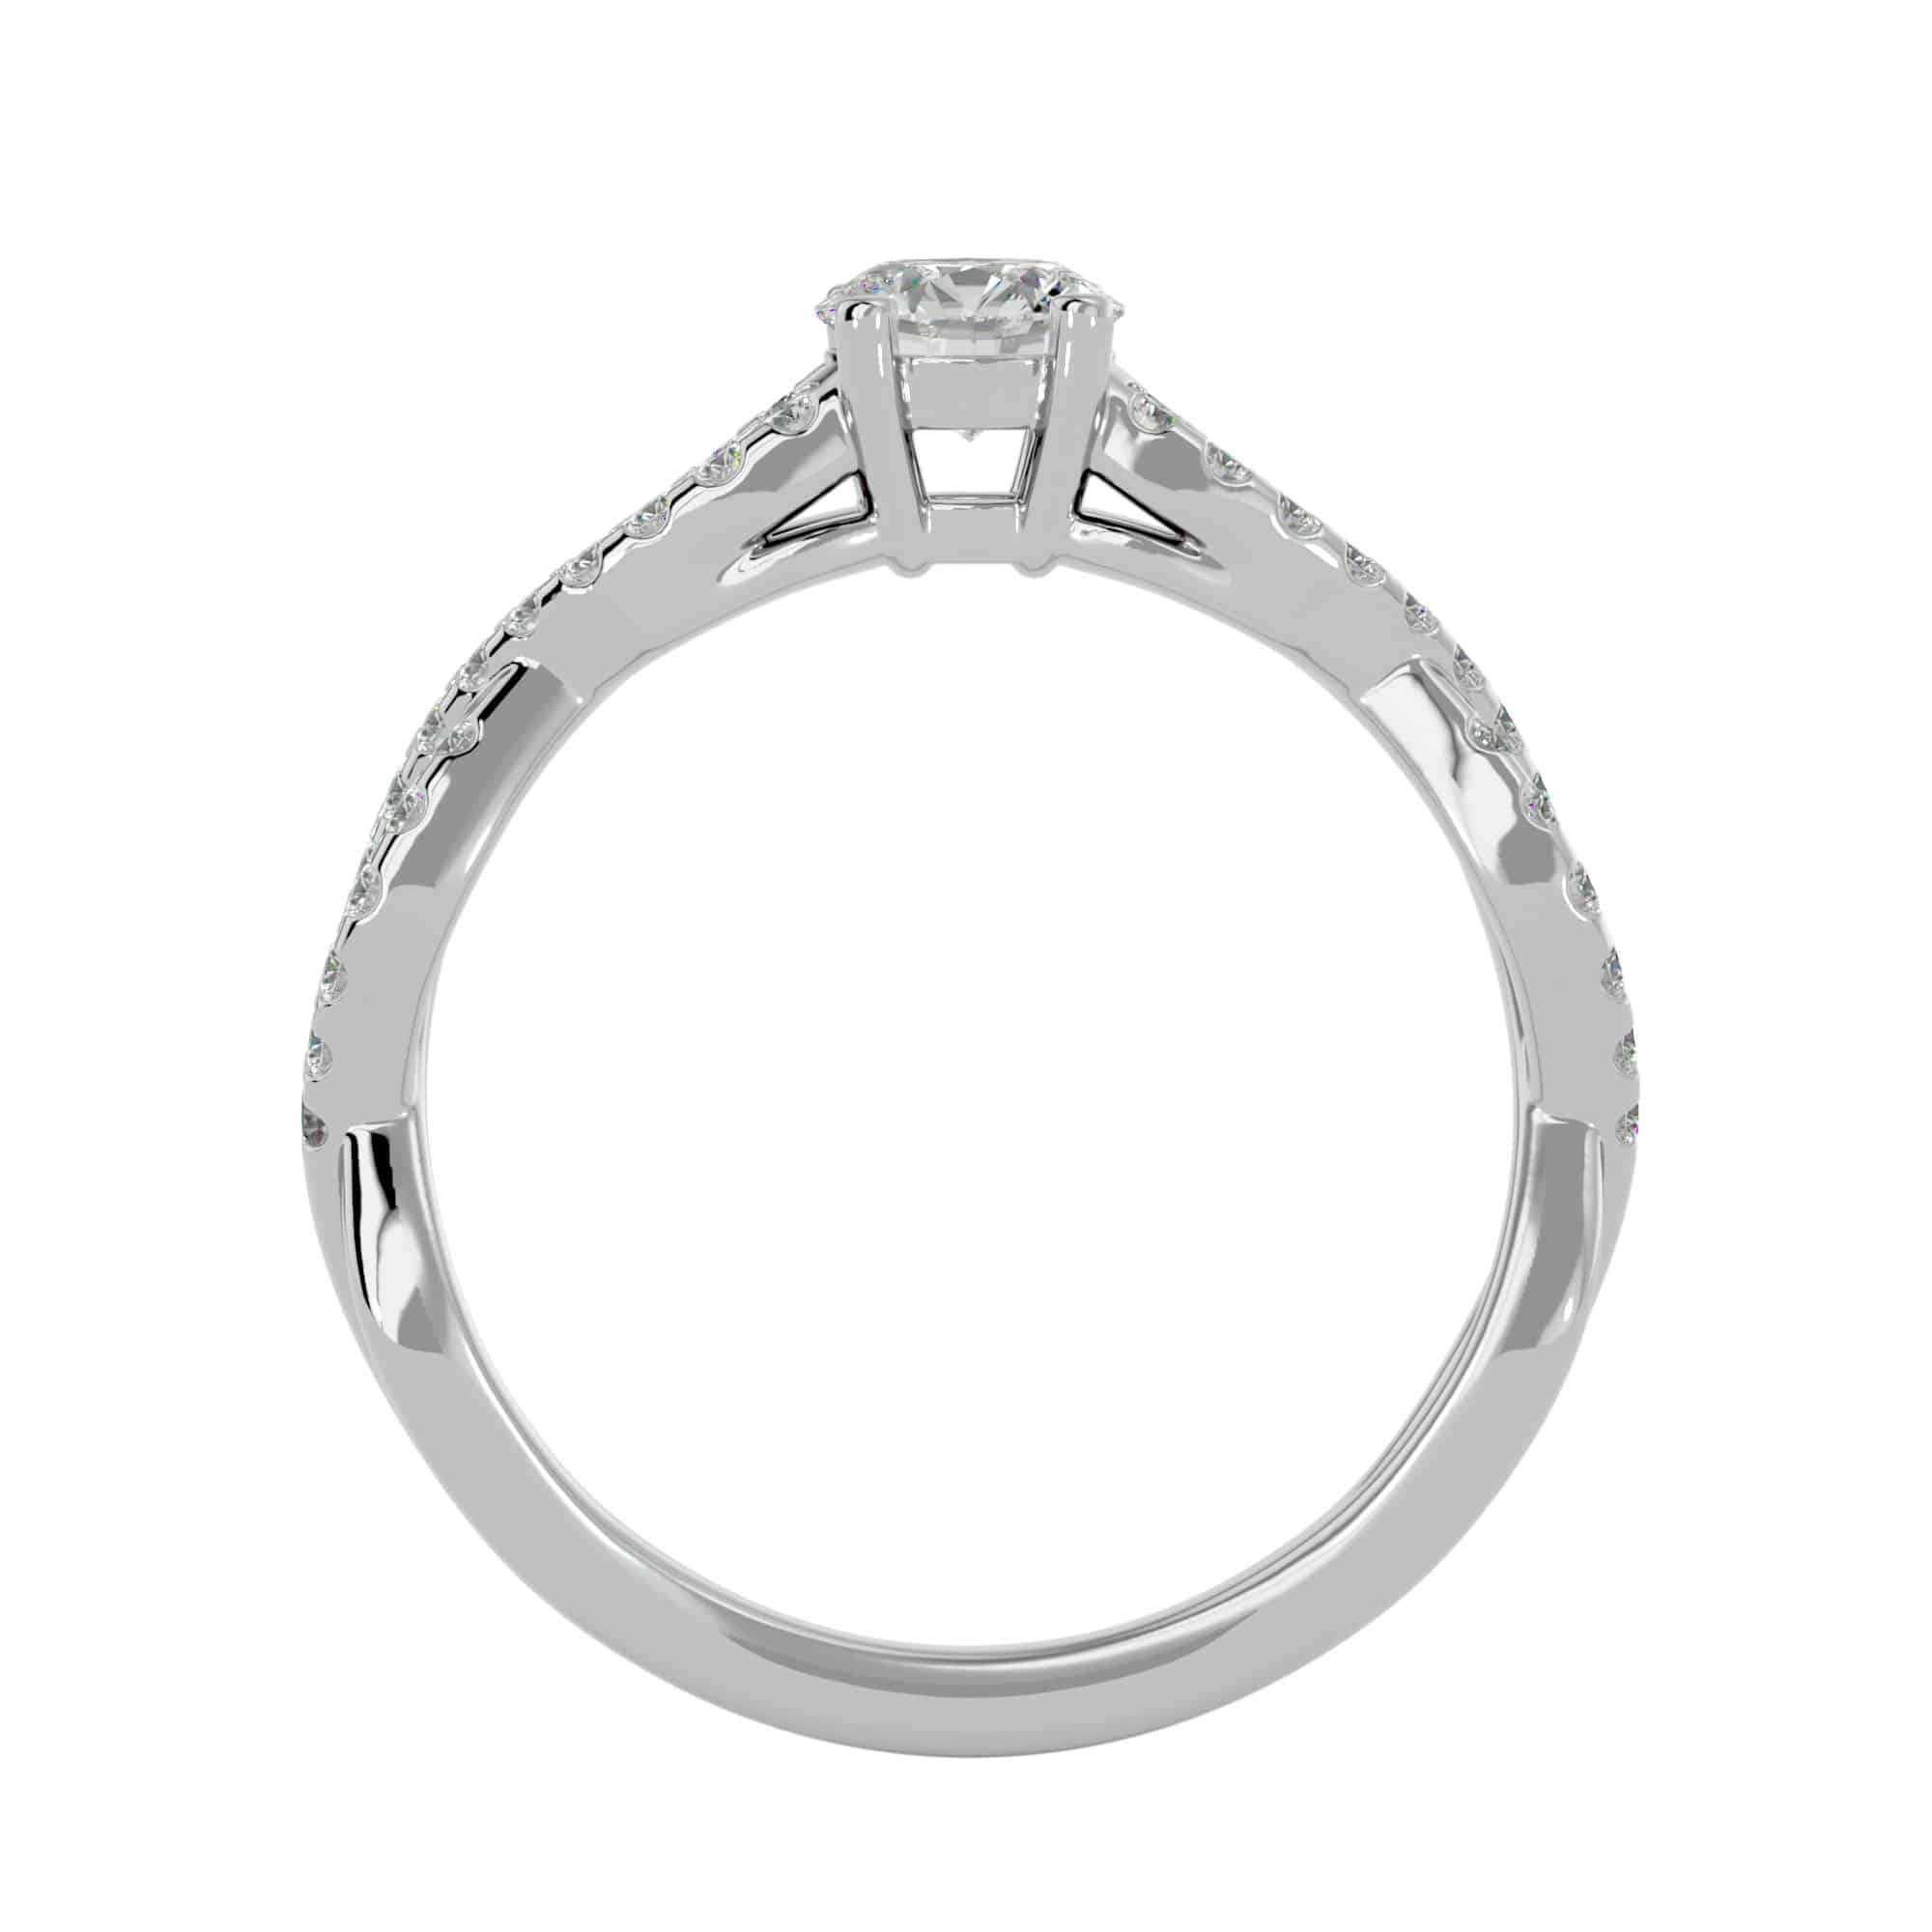 Criss-Cross Engagement Band Solitaire Diamond Ring